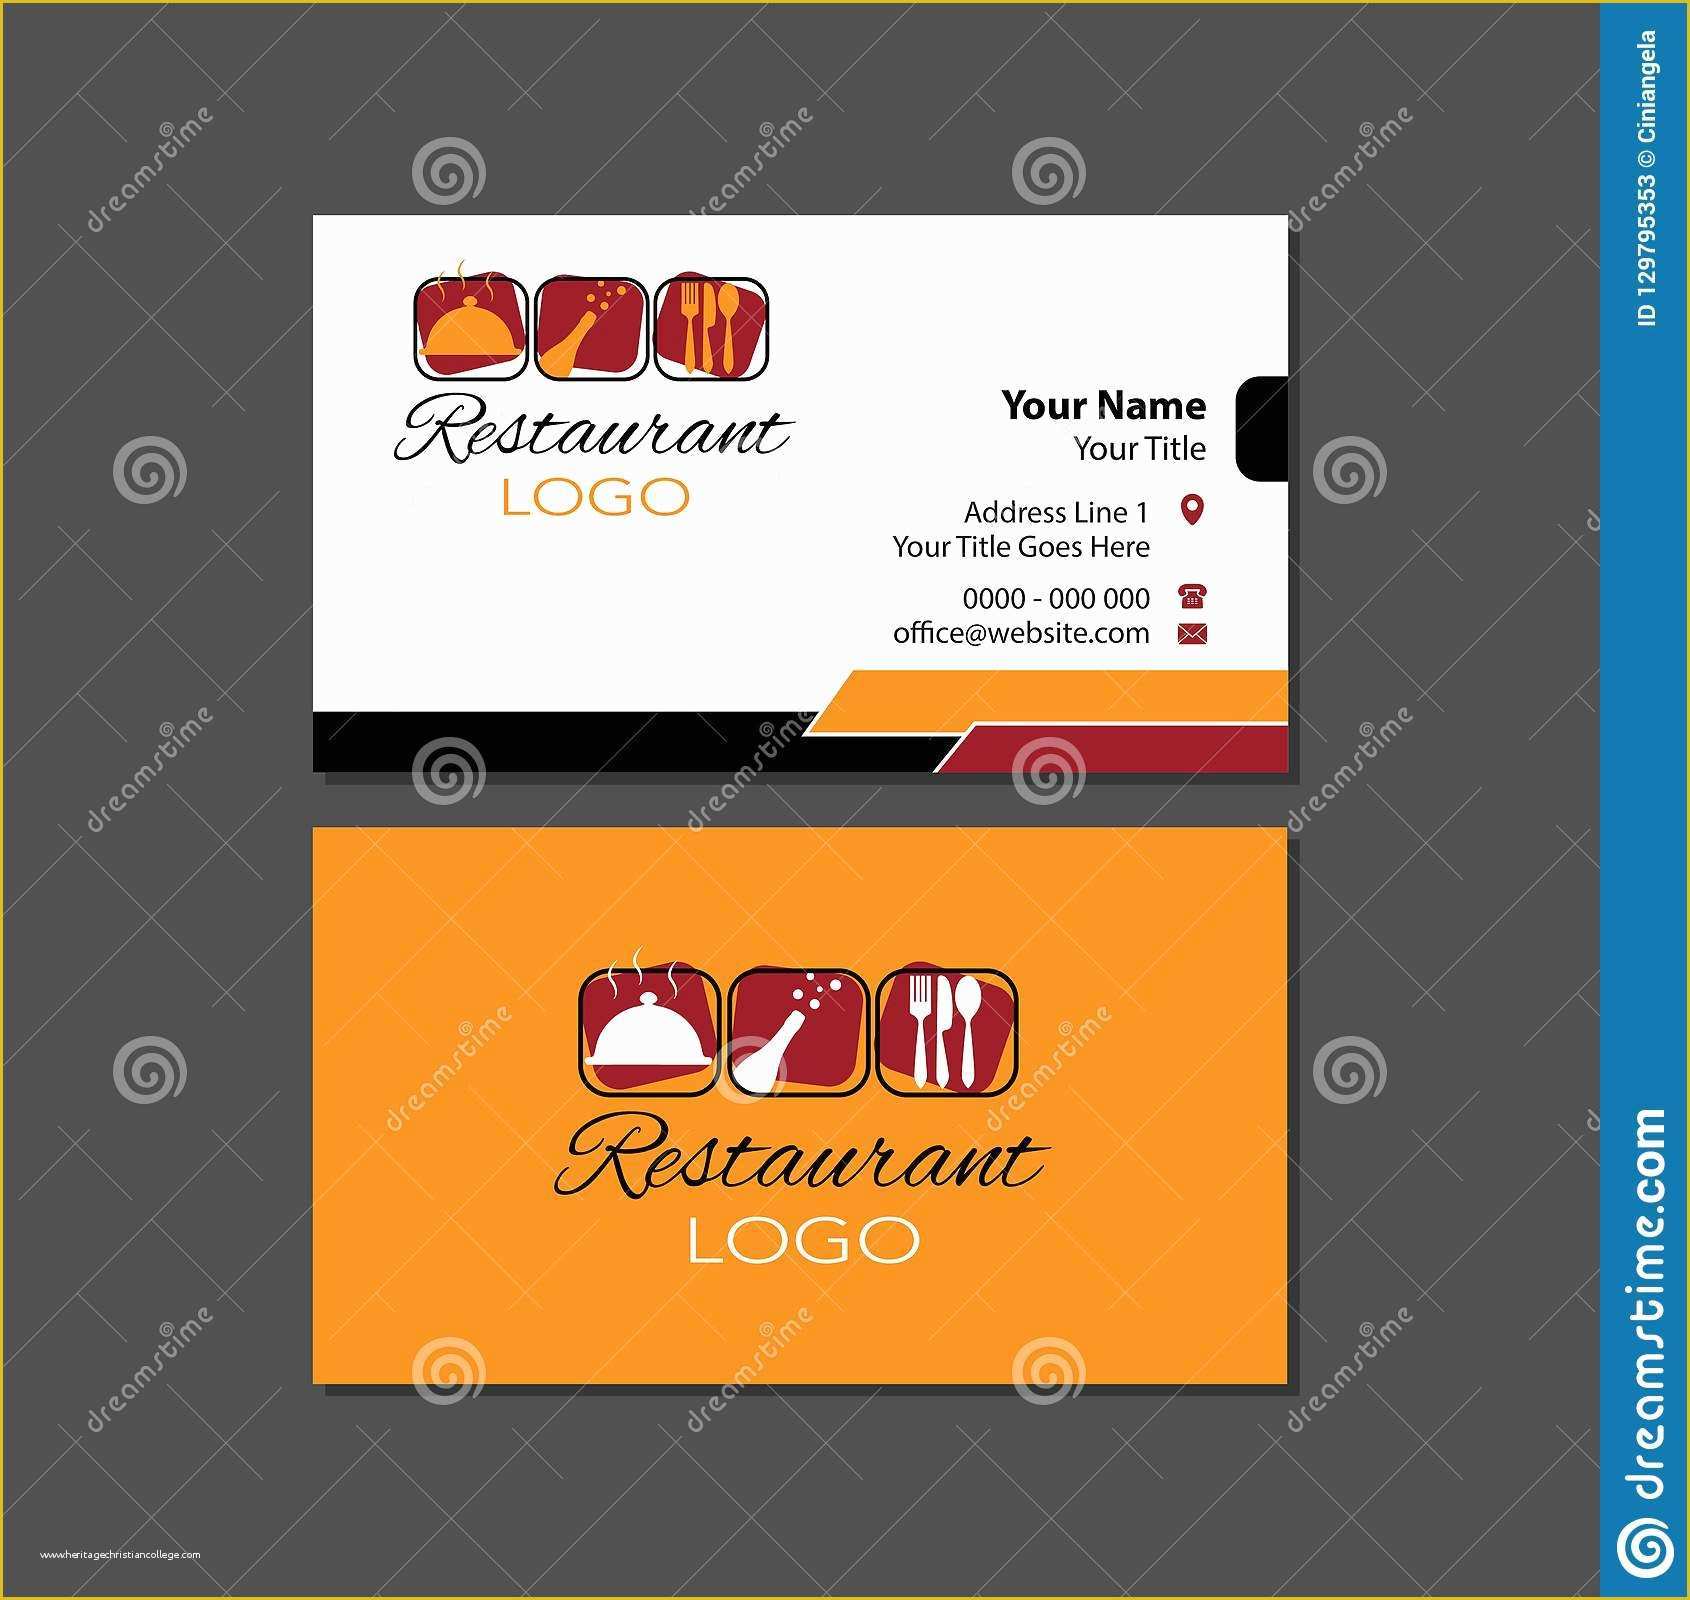 Restaurant Business Cards Templates Free Of Restaurant Business Card Template Editorial Stock